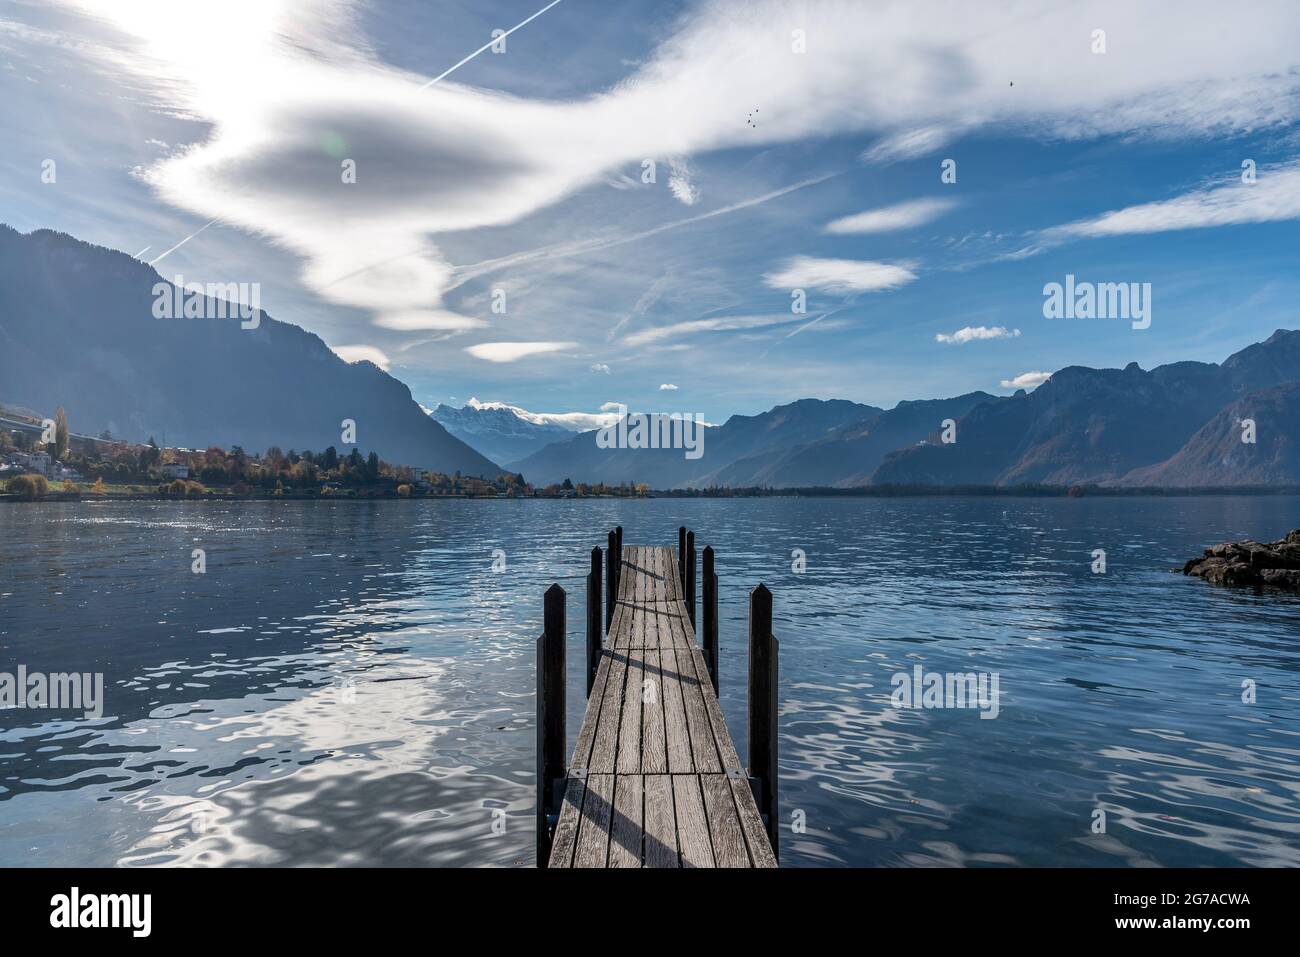 Beautiful landscape with mountains, lake and a small pier during cloudy day. Stock Photo